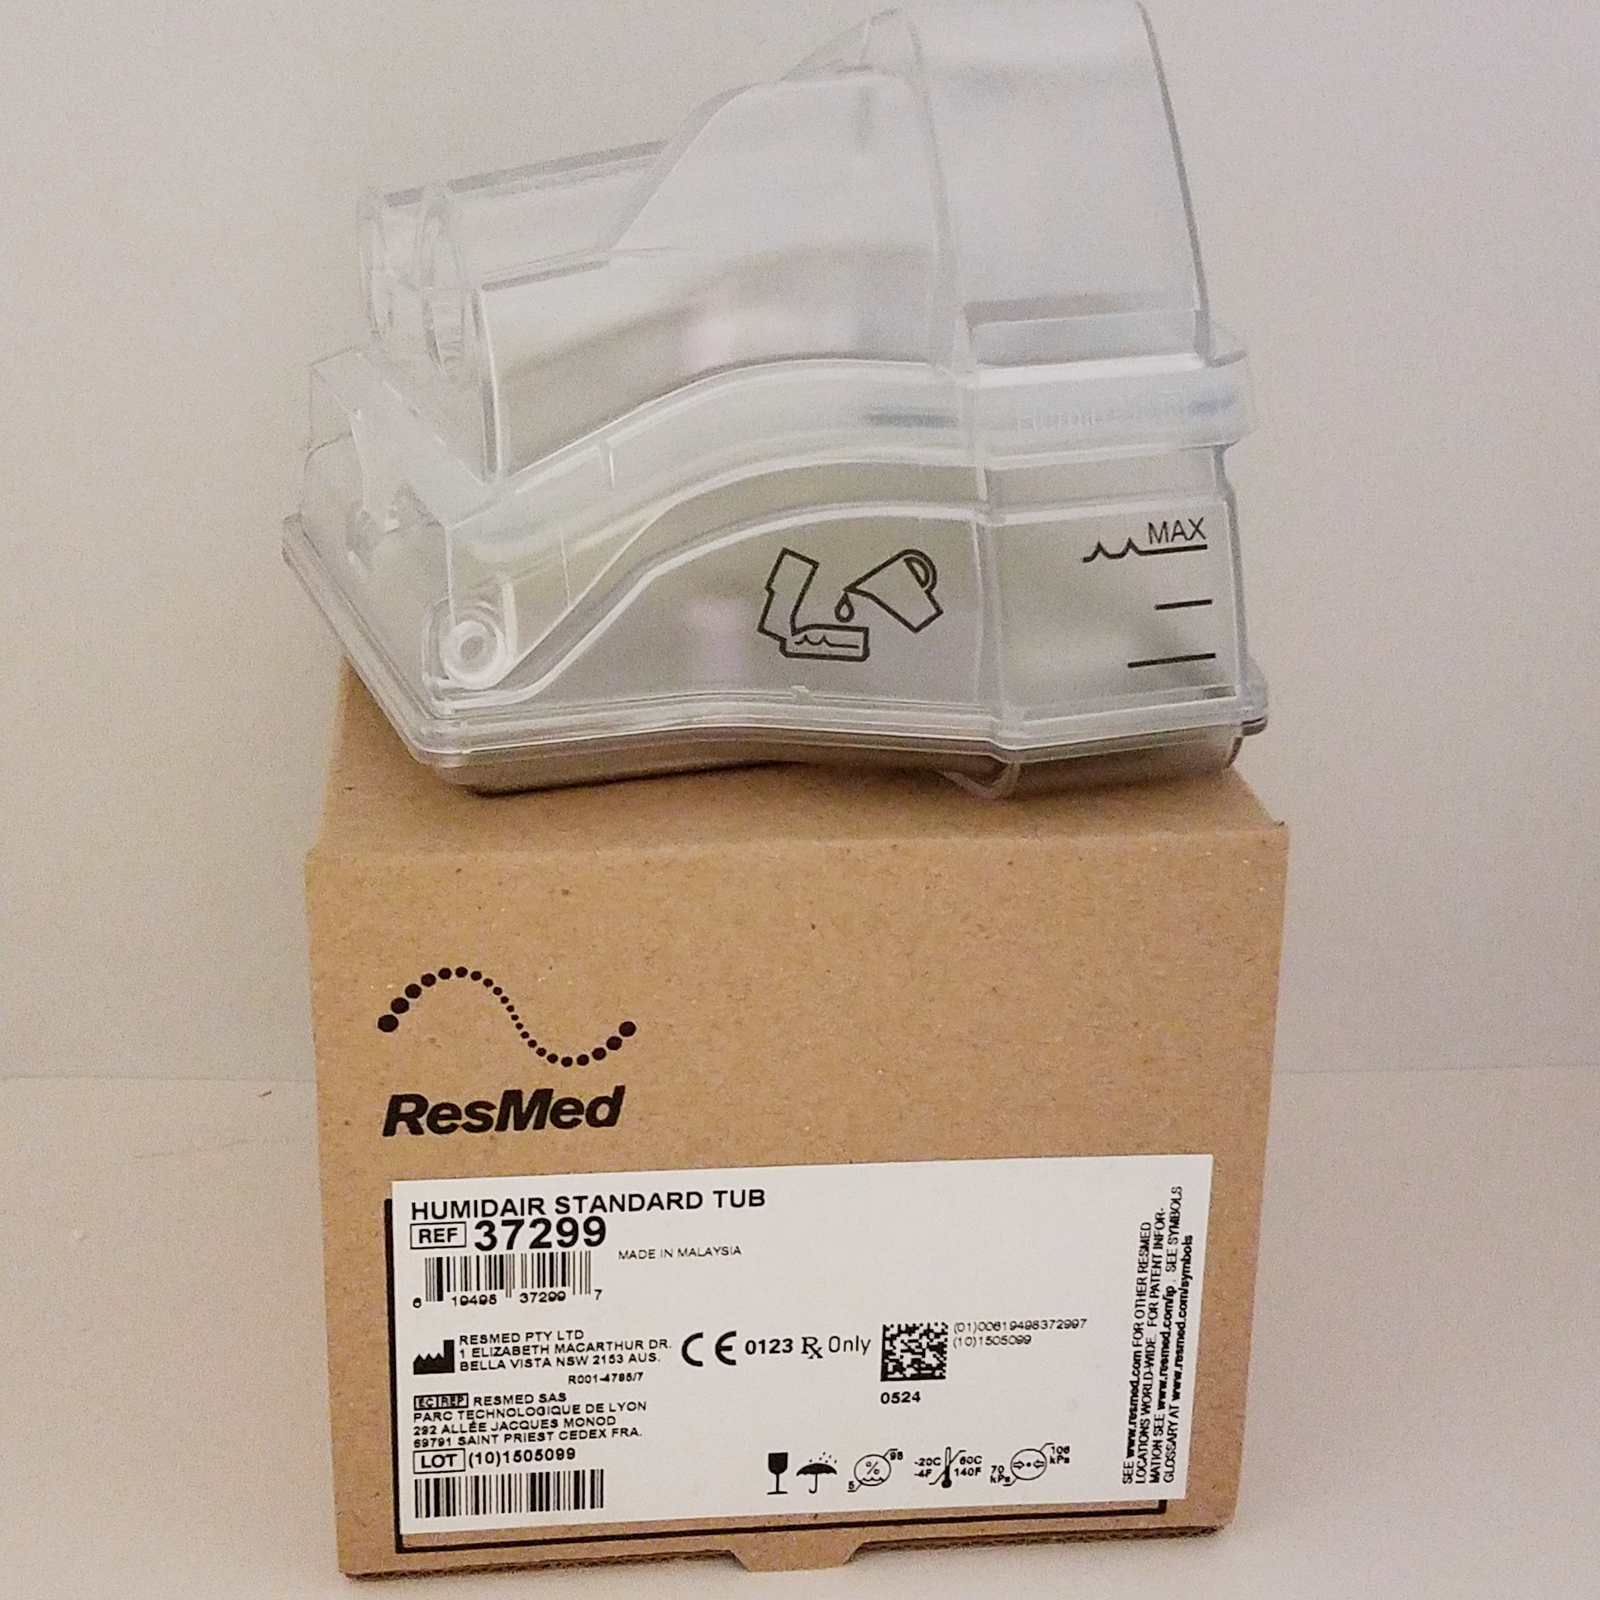 ResMed humidair cpap standard water tub 37299 for airsense 10 and aircurve 10